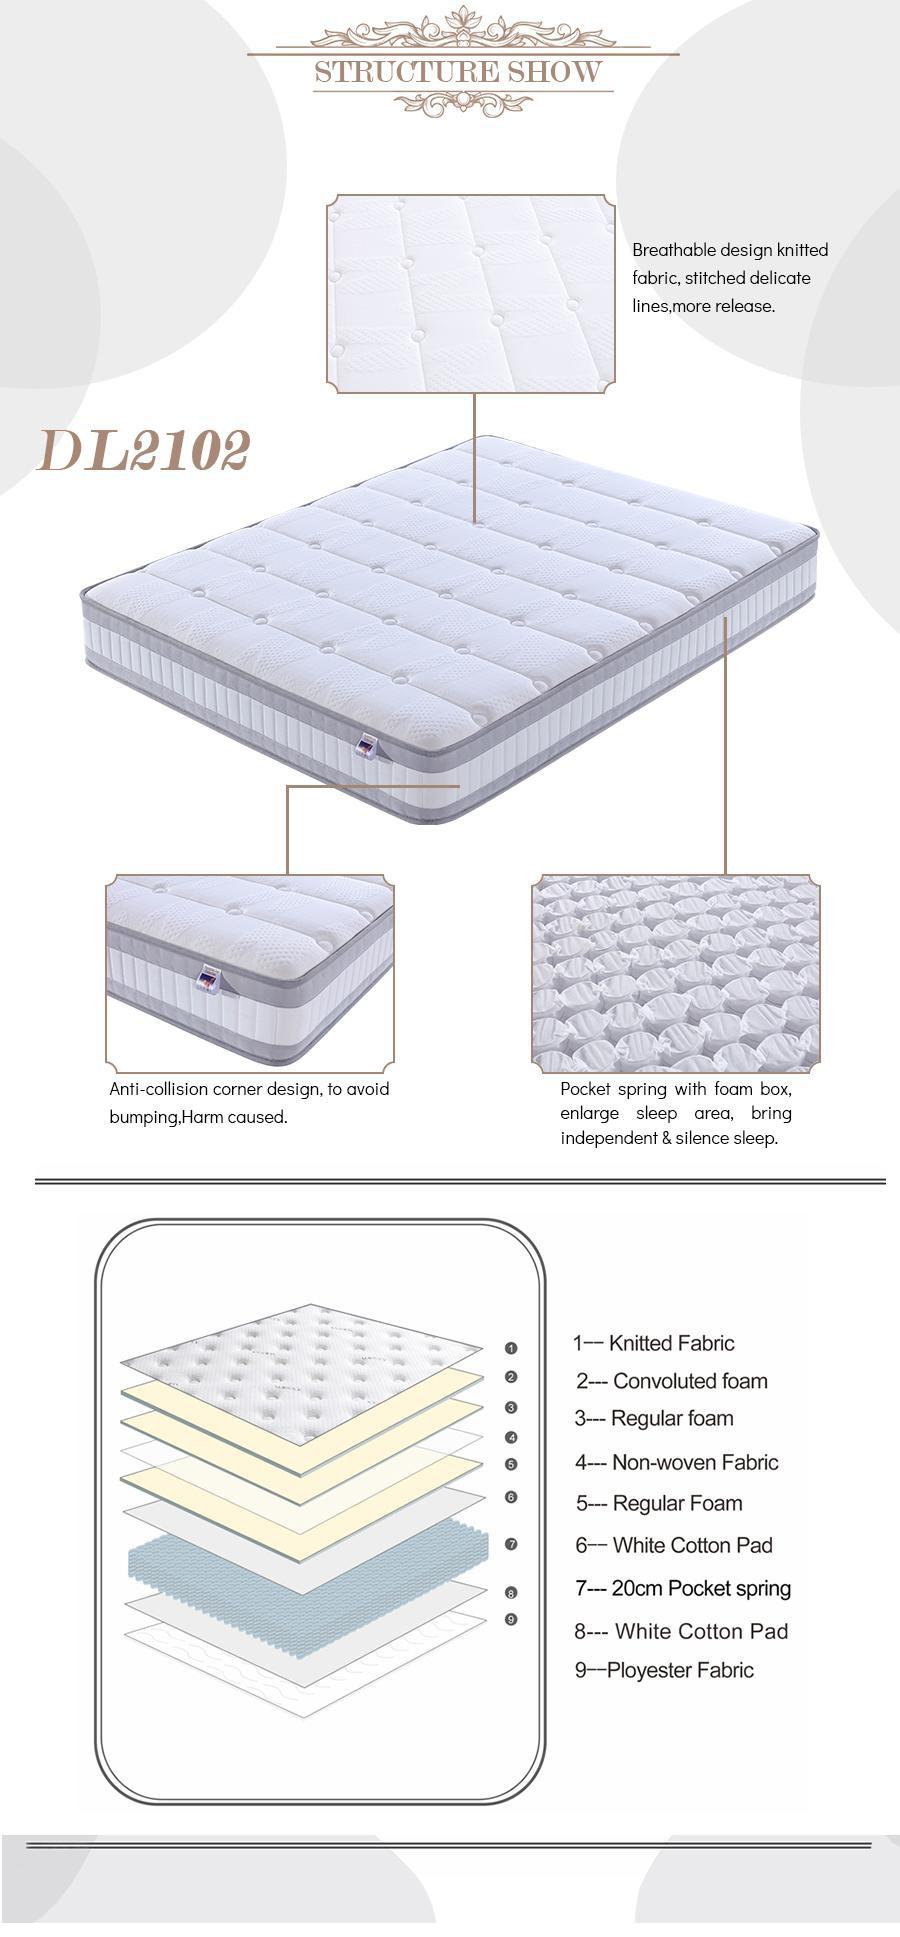 New Soft Dreamleader/OEM Compress and Roll in Carton Box Bedroom Mattress